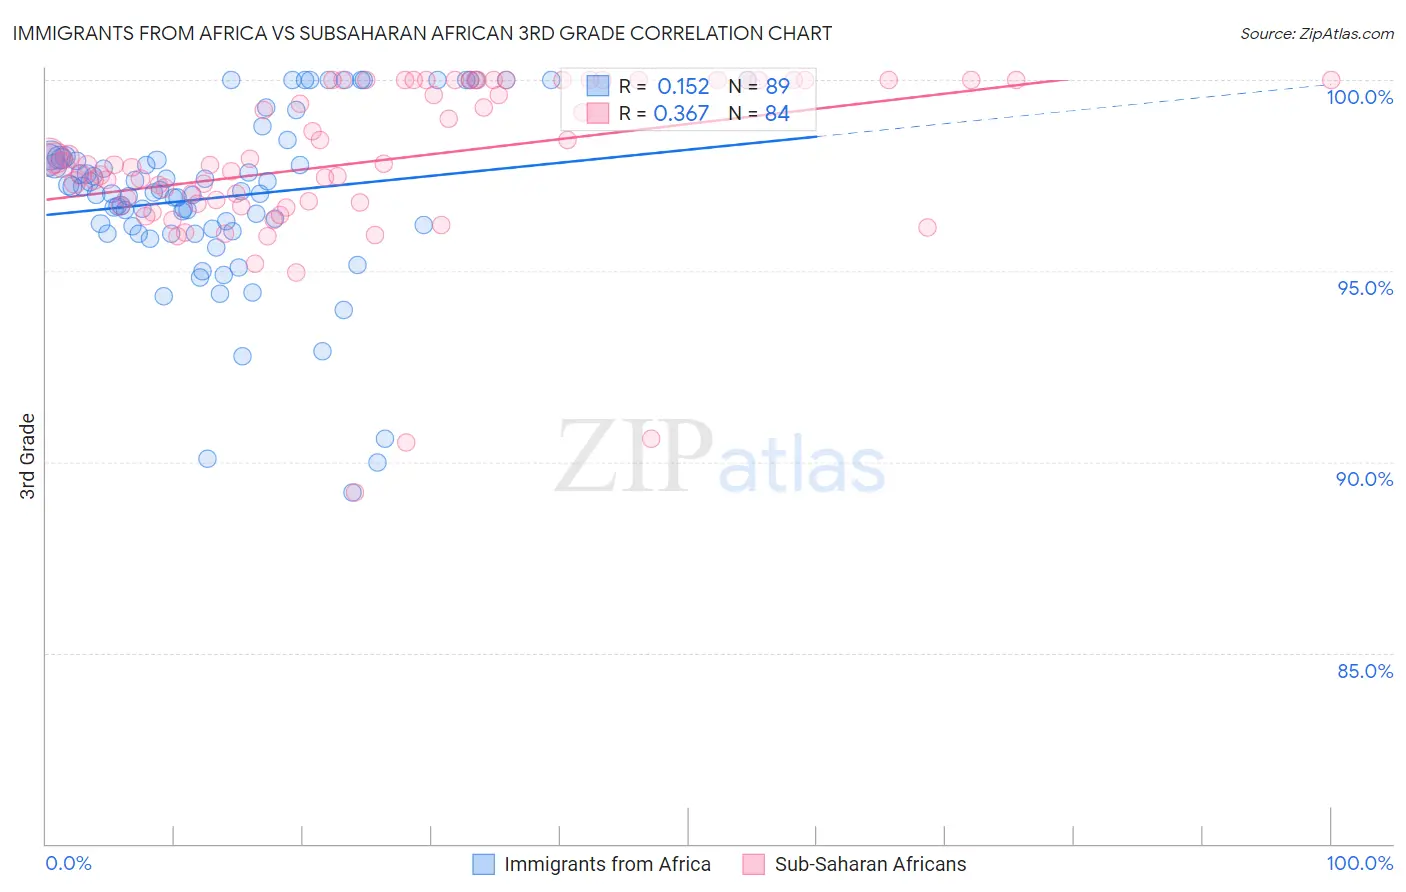 Immigrants from Africa vs Subsaharan African 3rd Grade